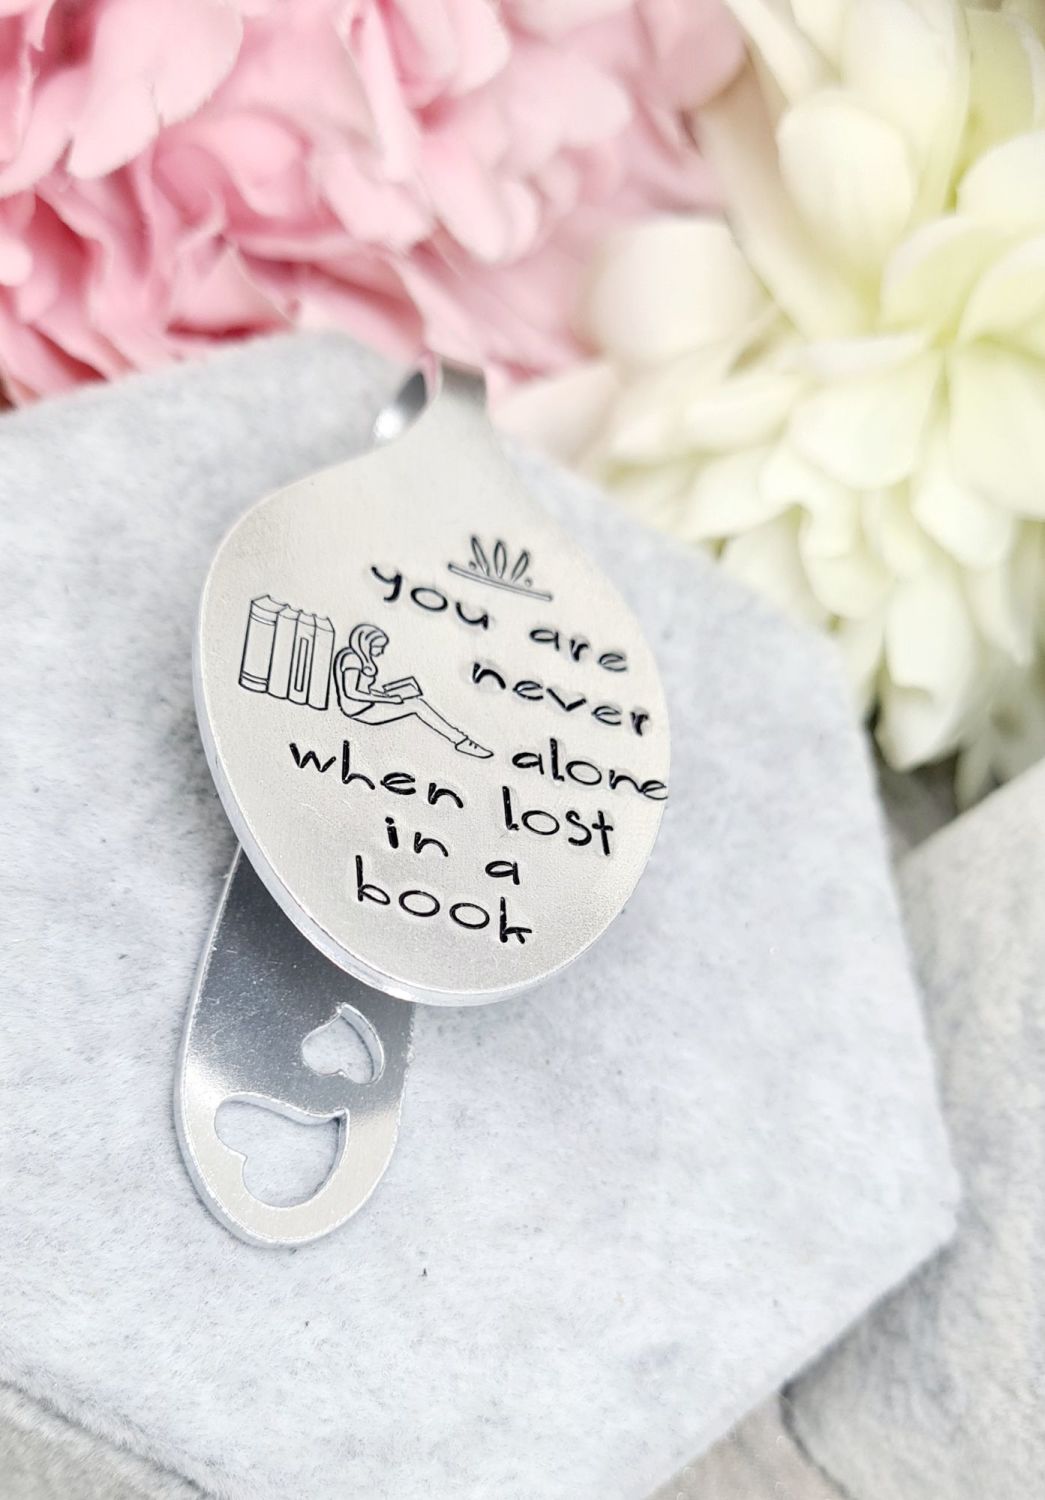 Spoon Style Bookmark - You are never alone when lost in a book